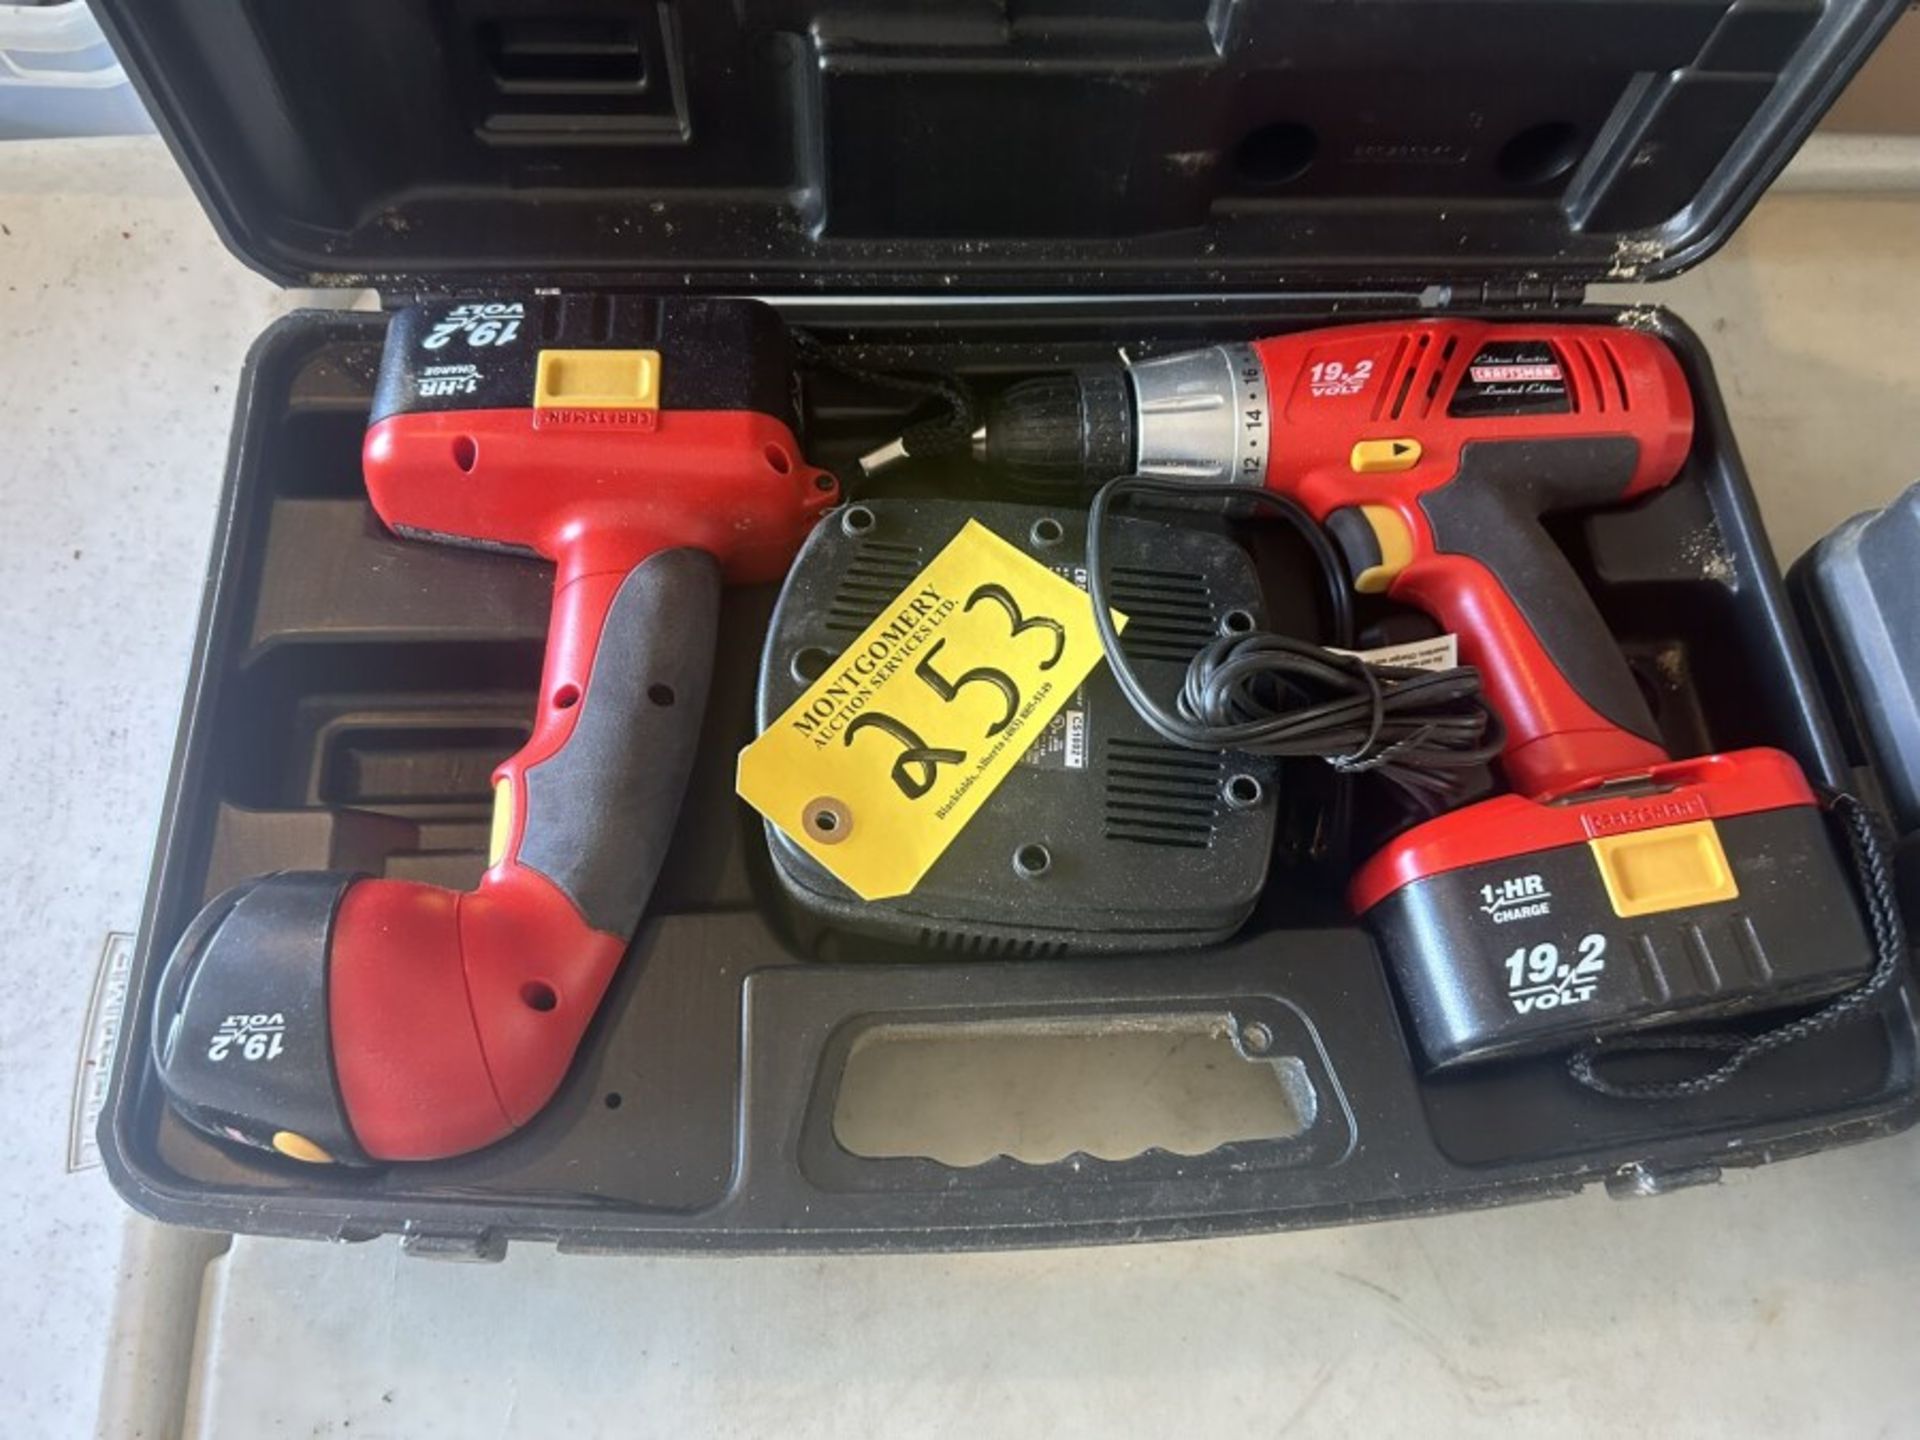 CRAFTSMAN CORDLESS DRILL W/ BATTERY, CHARGER & LIGHT